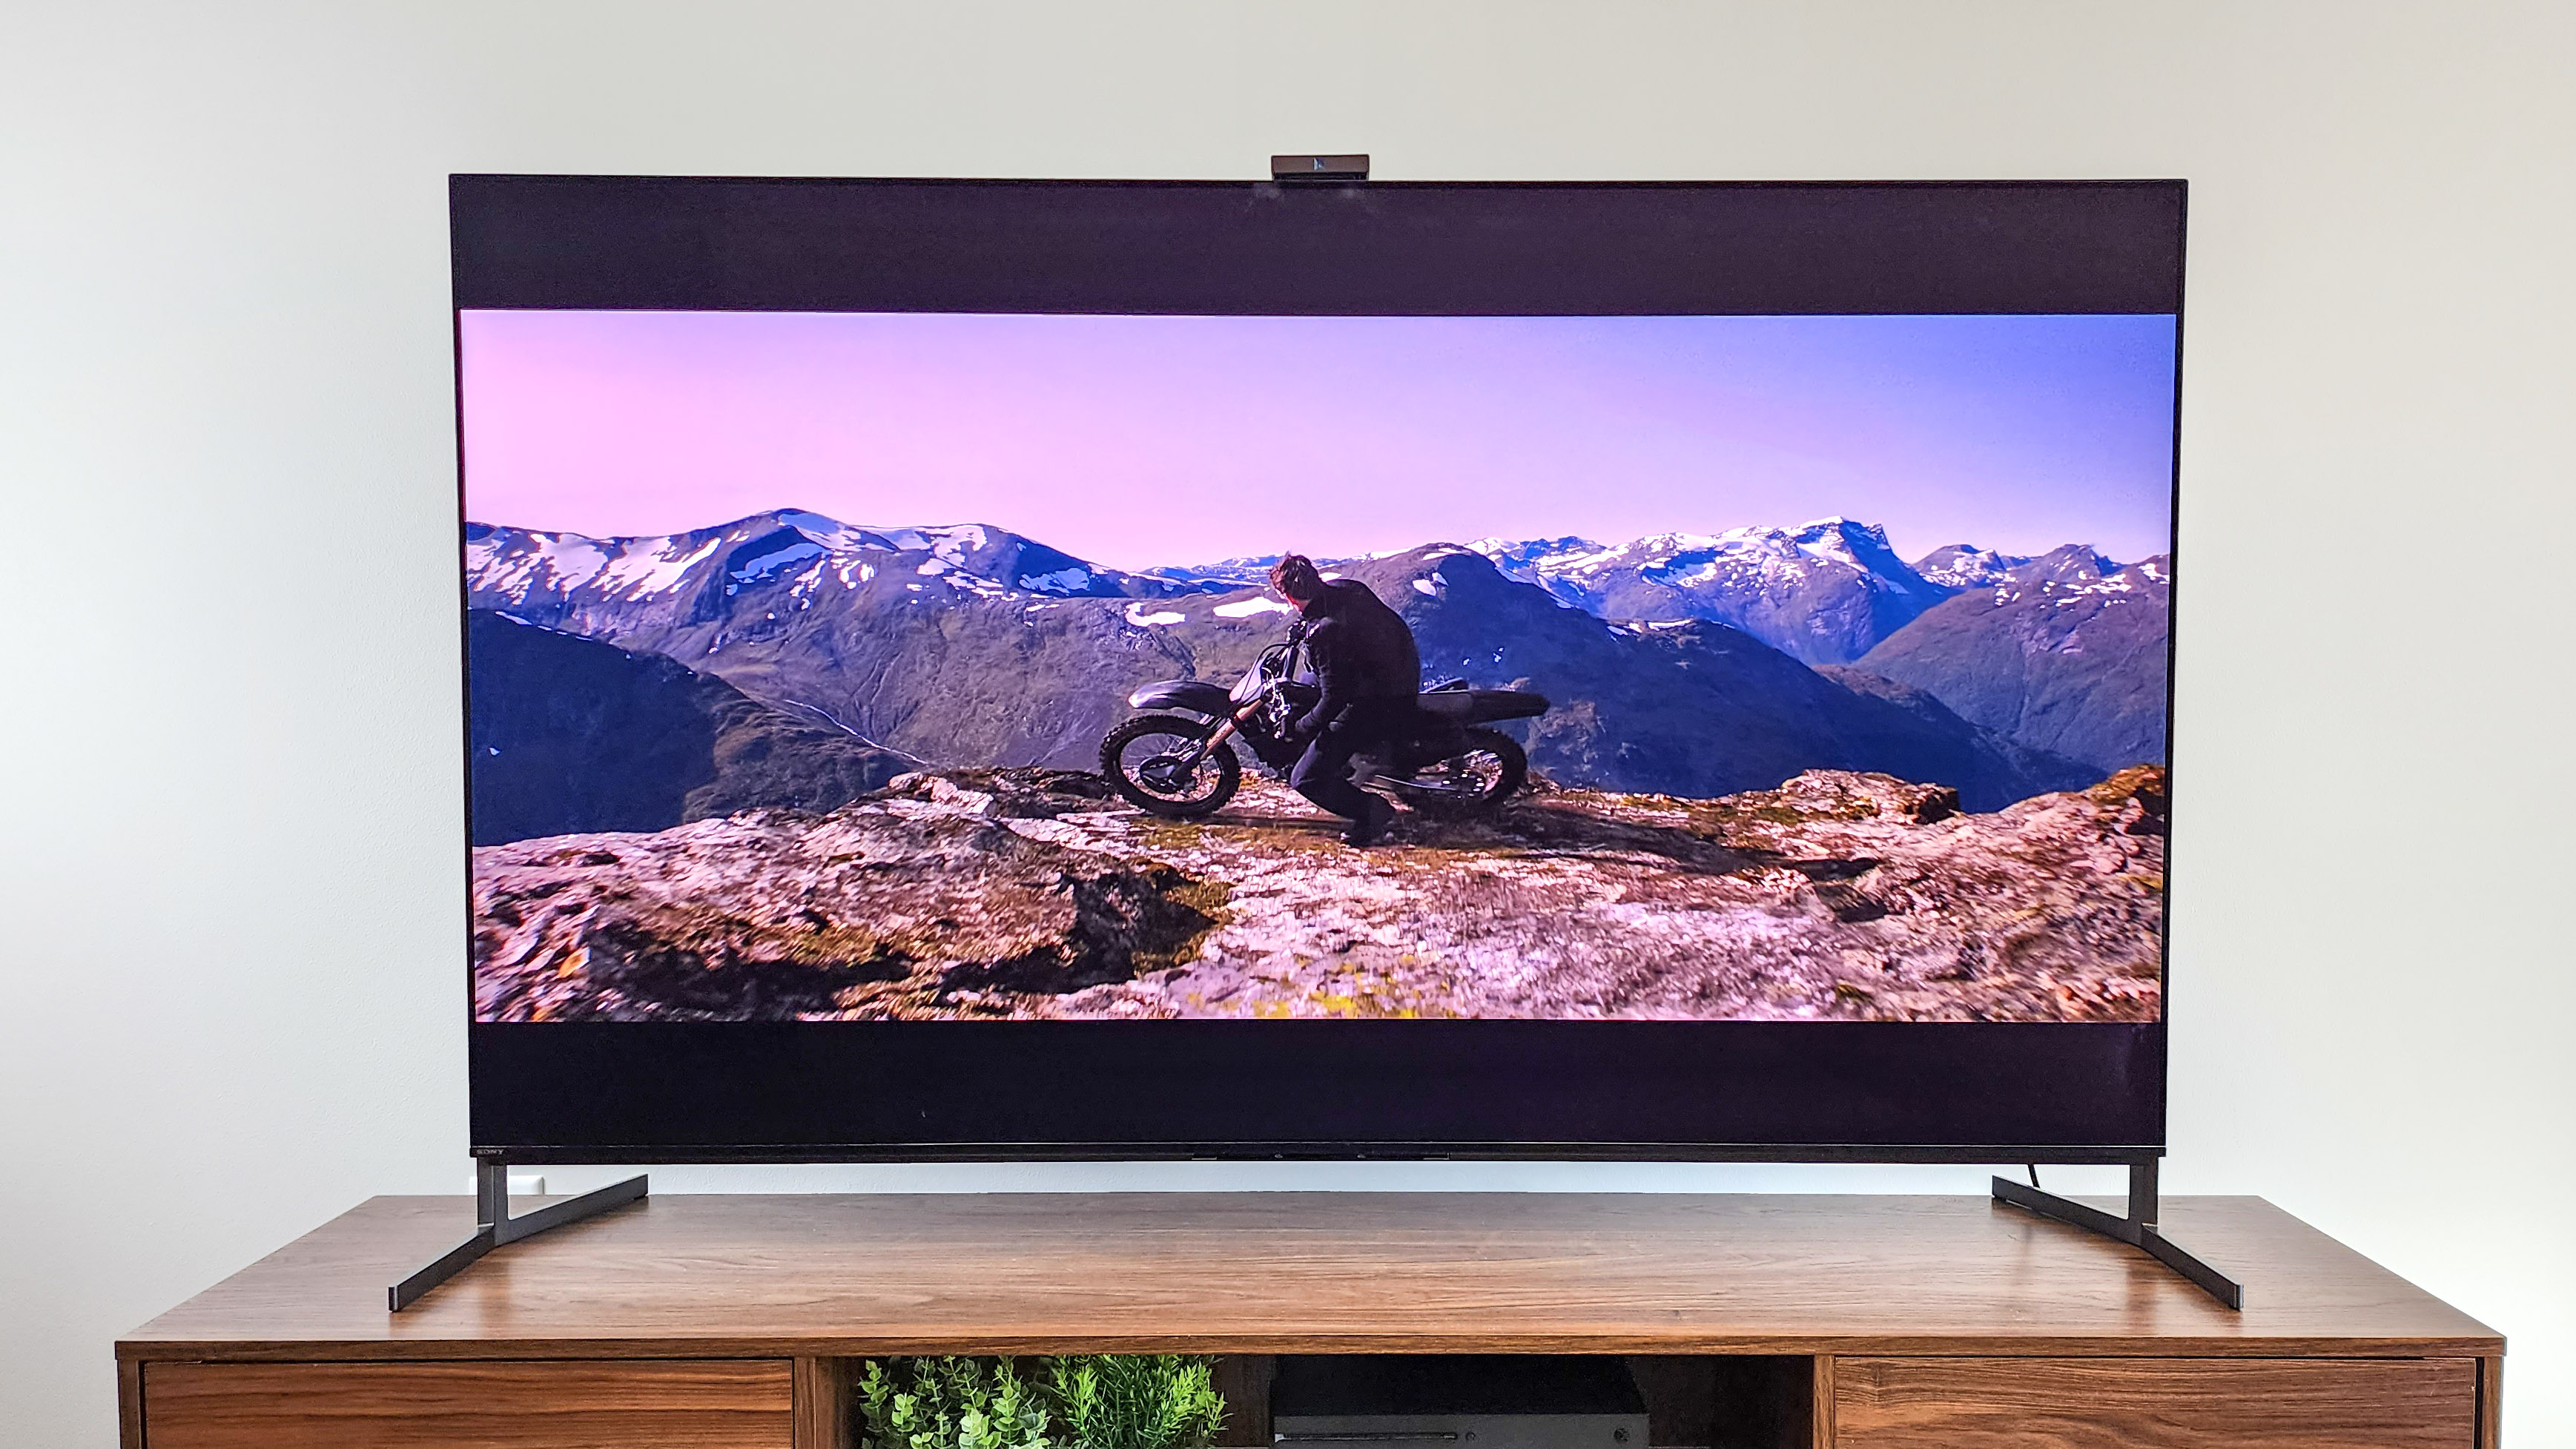 LG G3 vs. Samsung S95C: Which flagship OLED TV should you buy?